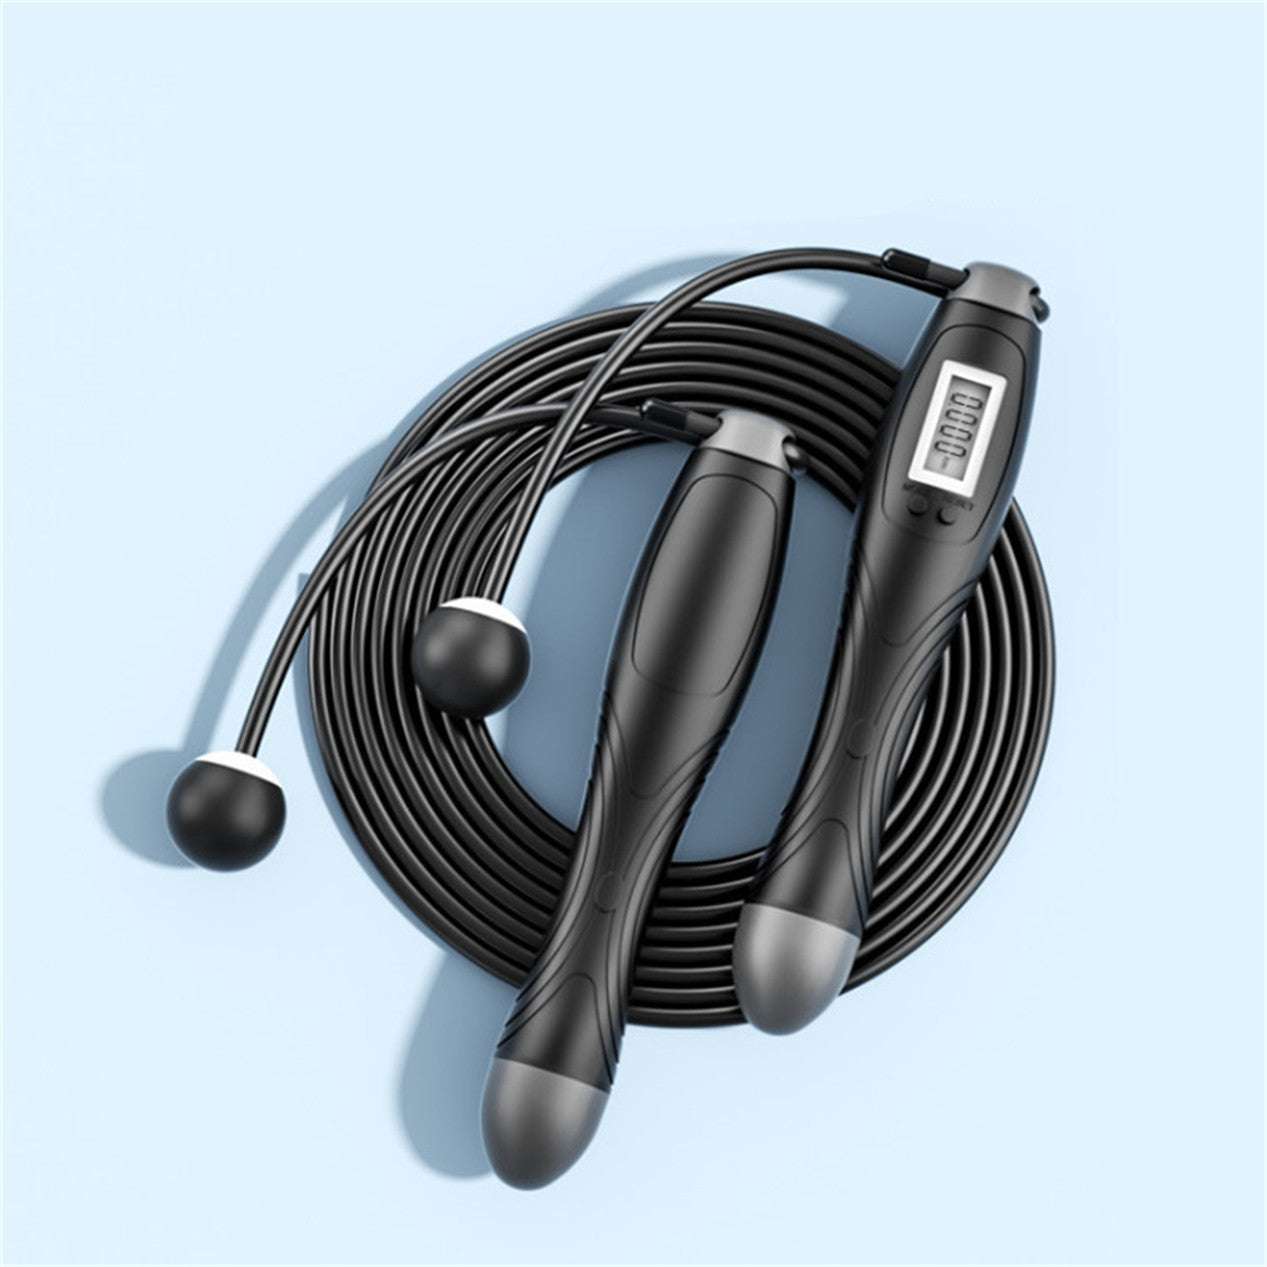 Cordless skipping rope, electronic fitness equipment, Sparq Mart - available at Sparq Mart